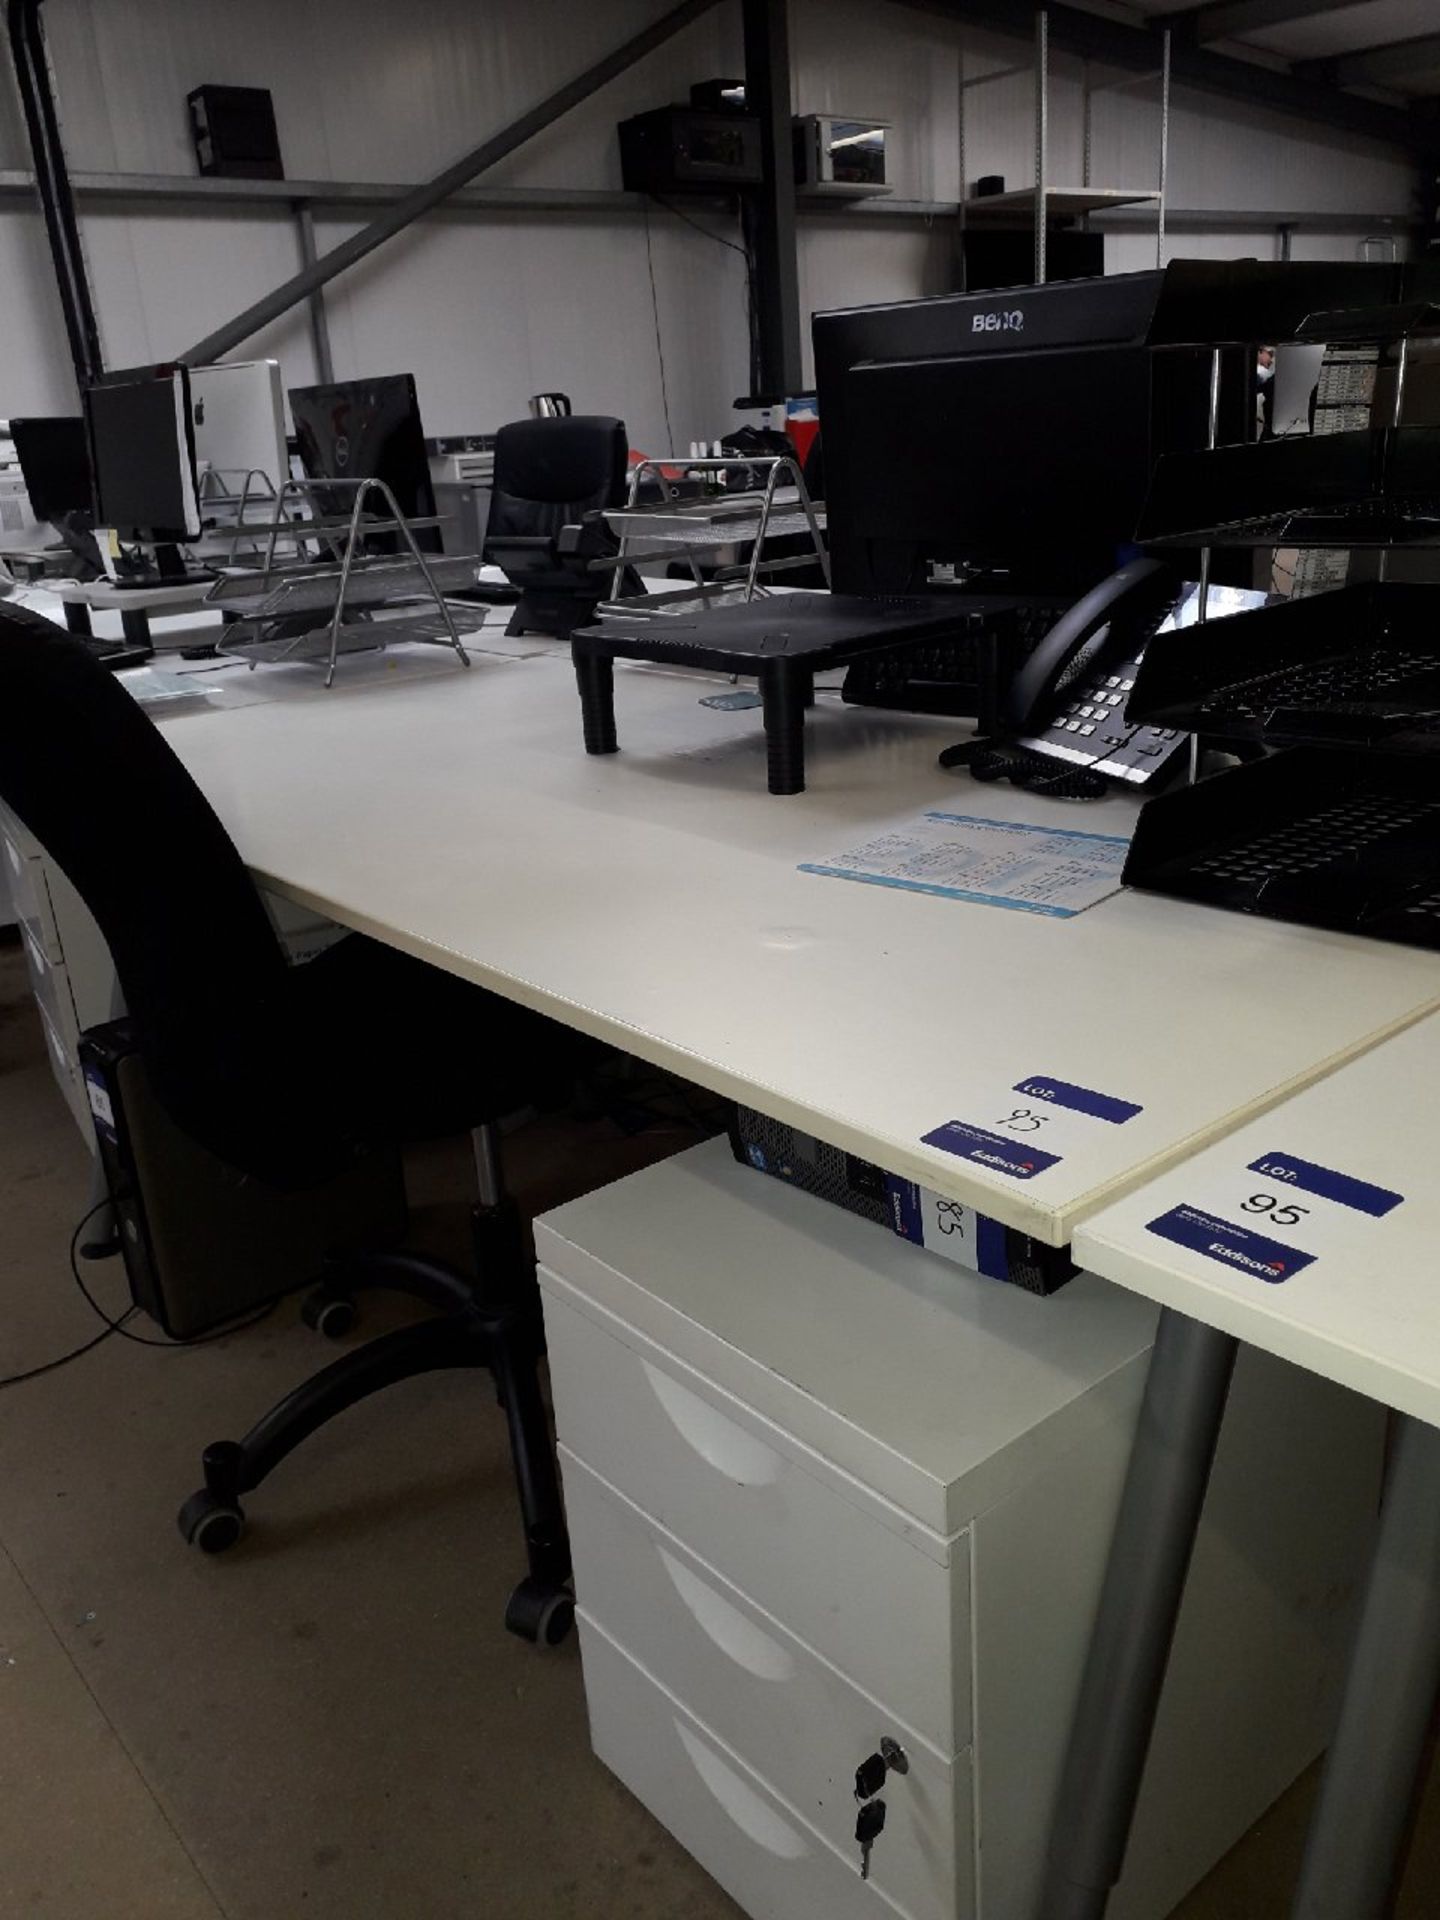 4 desks 1600 x 800 to include pedestals, chairs and desk furniture (excludes PC's and telephones)